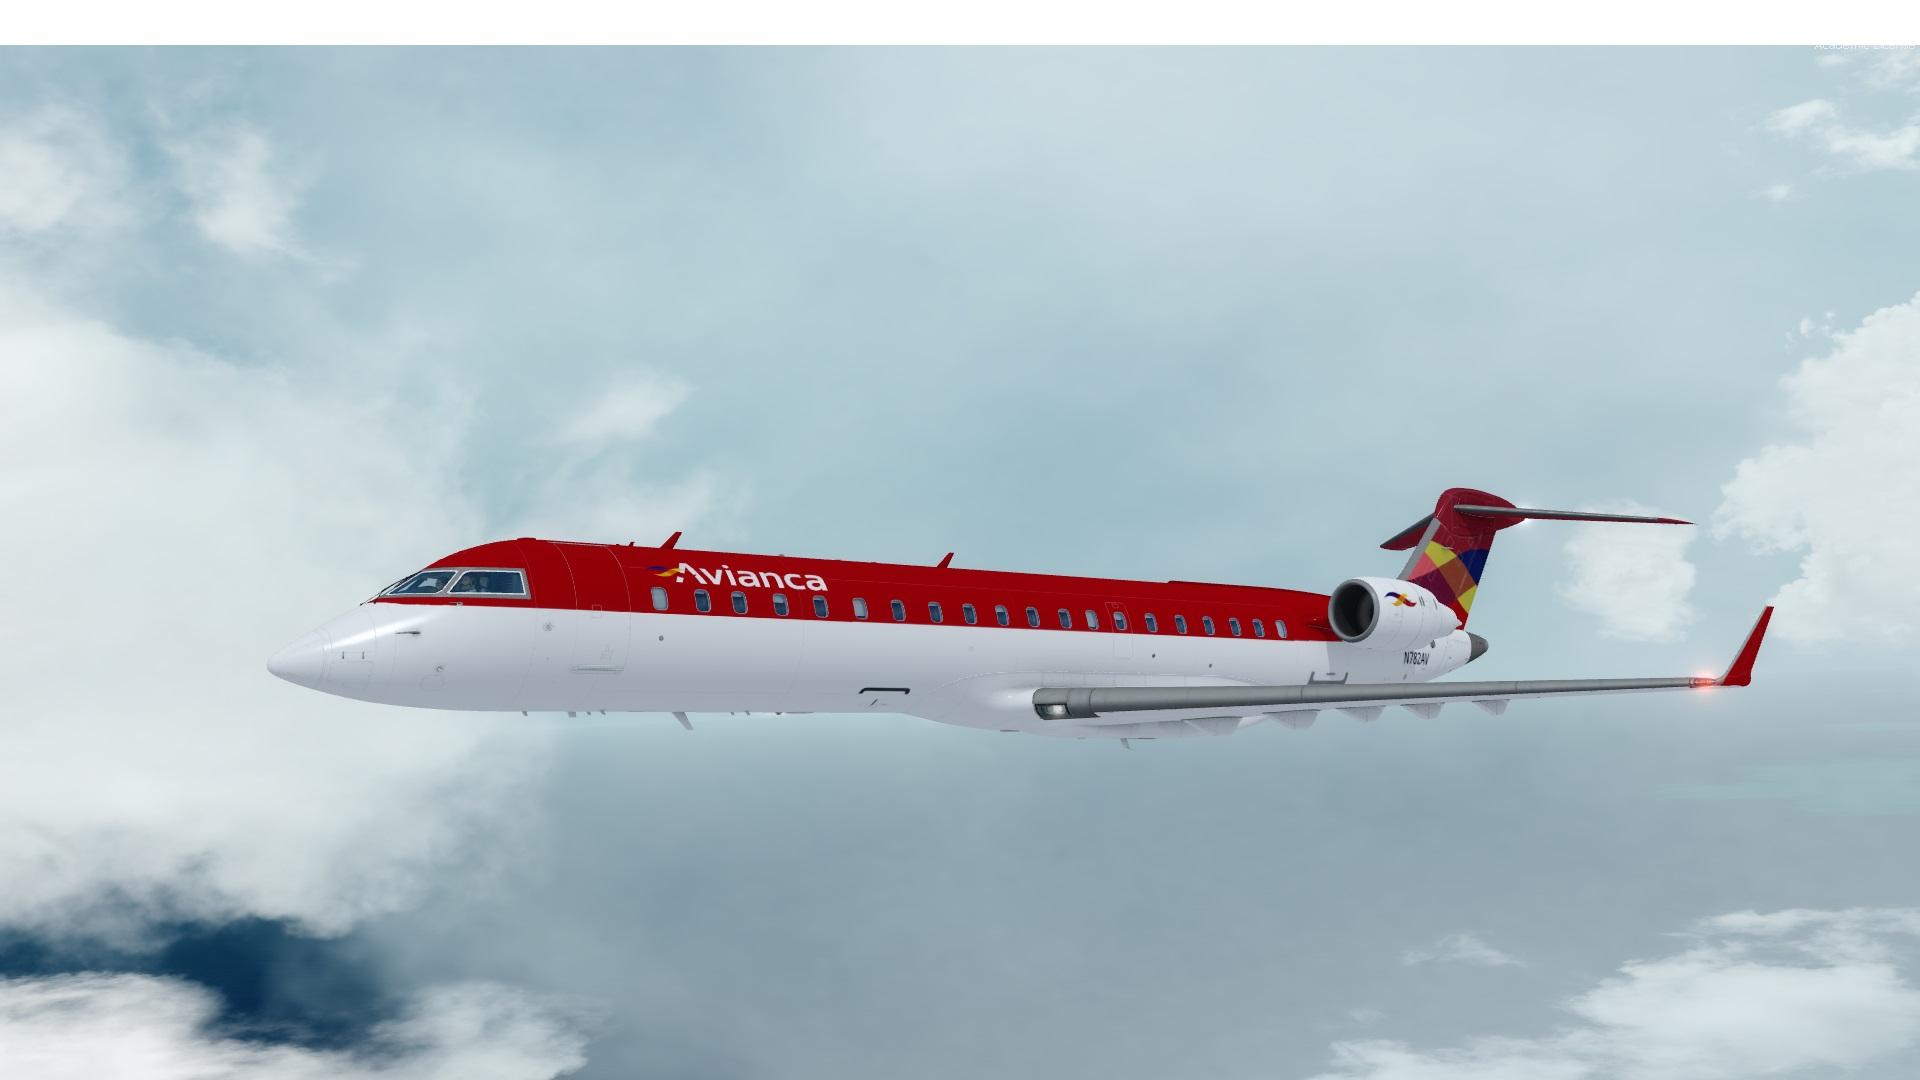 More information about "texture.Avianca"